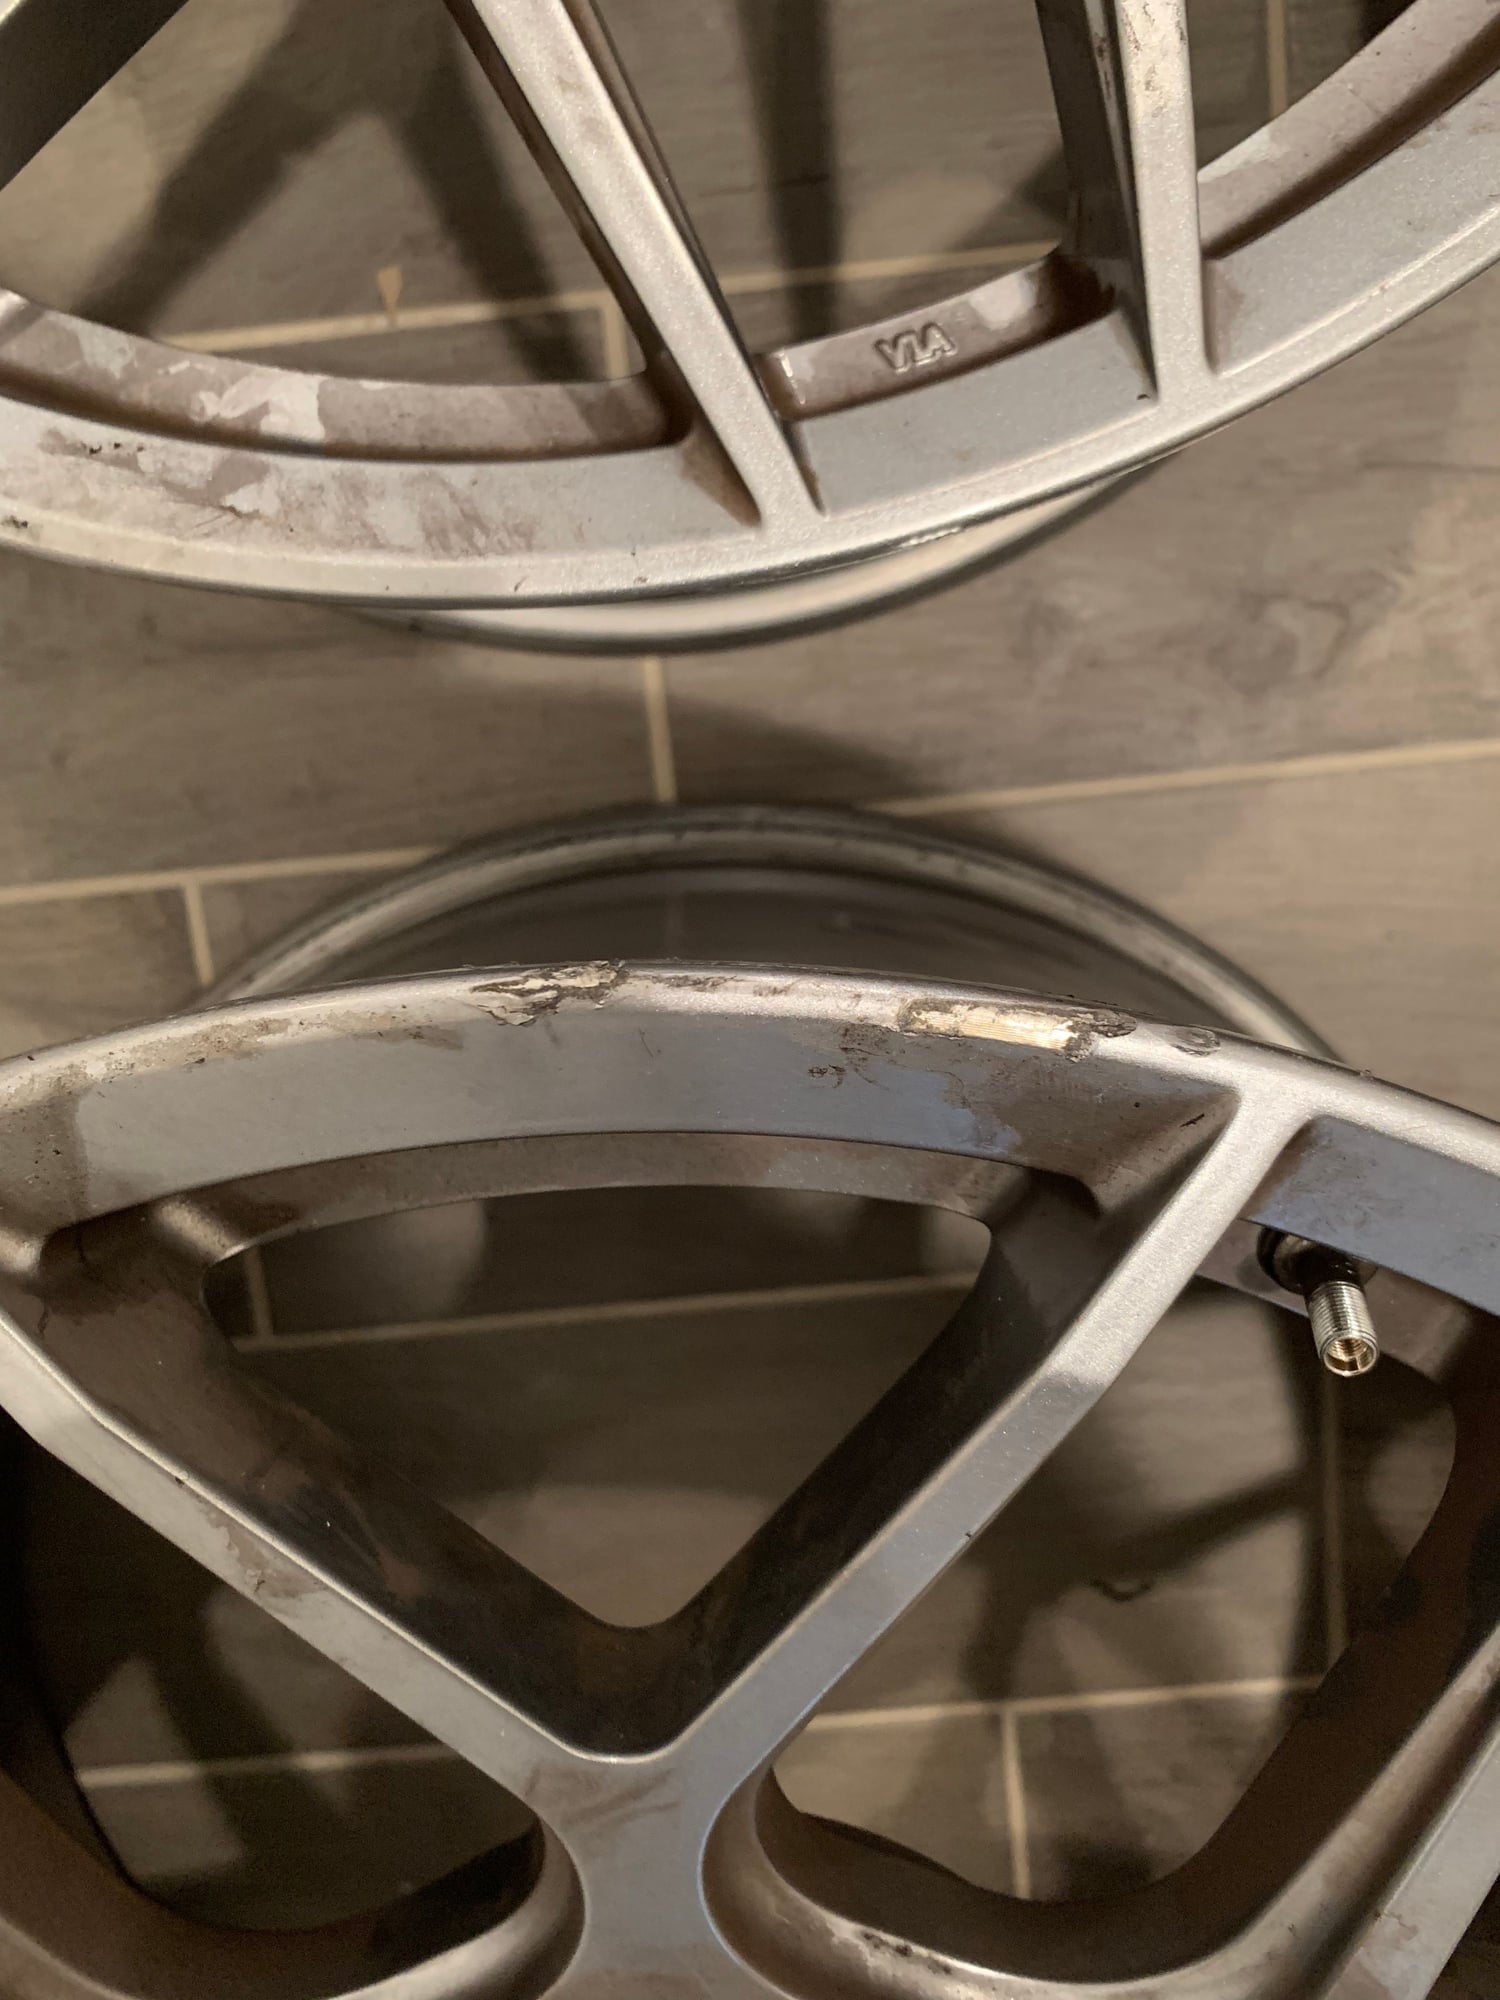 Wheels and Tires/Axles - FS: HRE FF01 19" Wheels in Liquid Silver - Used - 2005 to 2012 Porsche 911 - Houston, TX 77003, United States